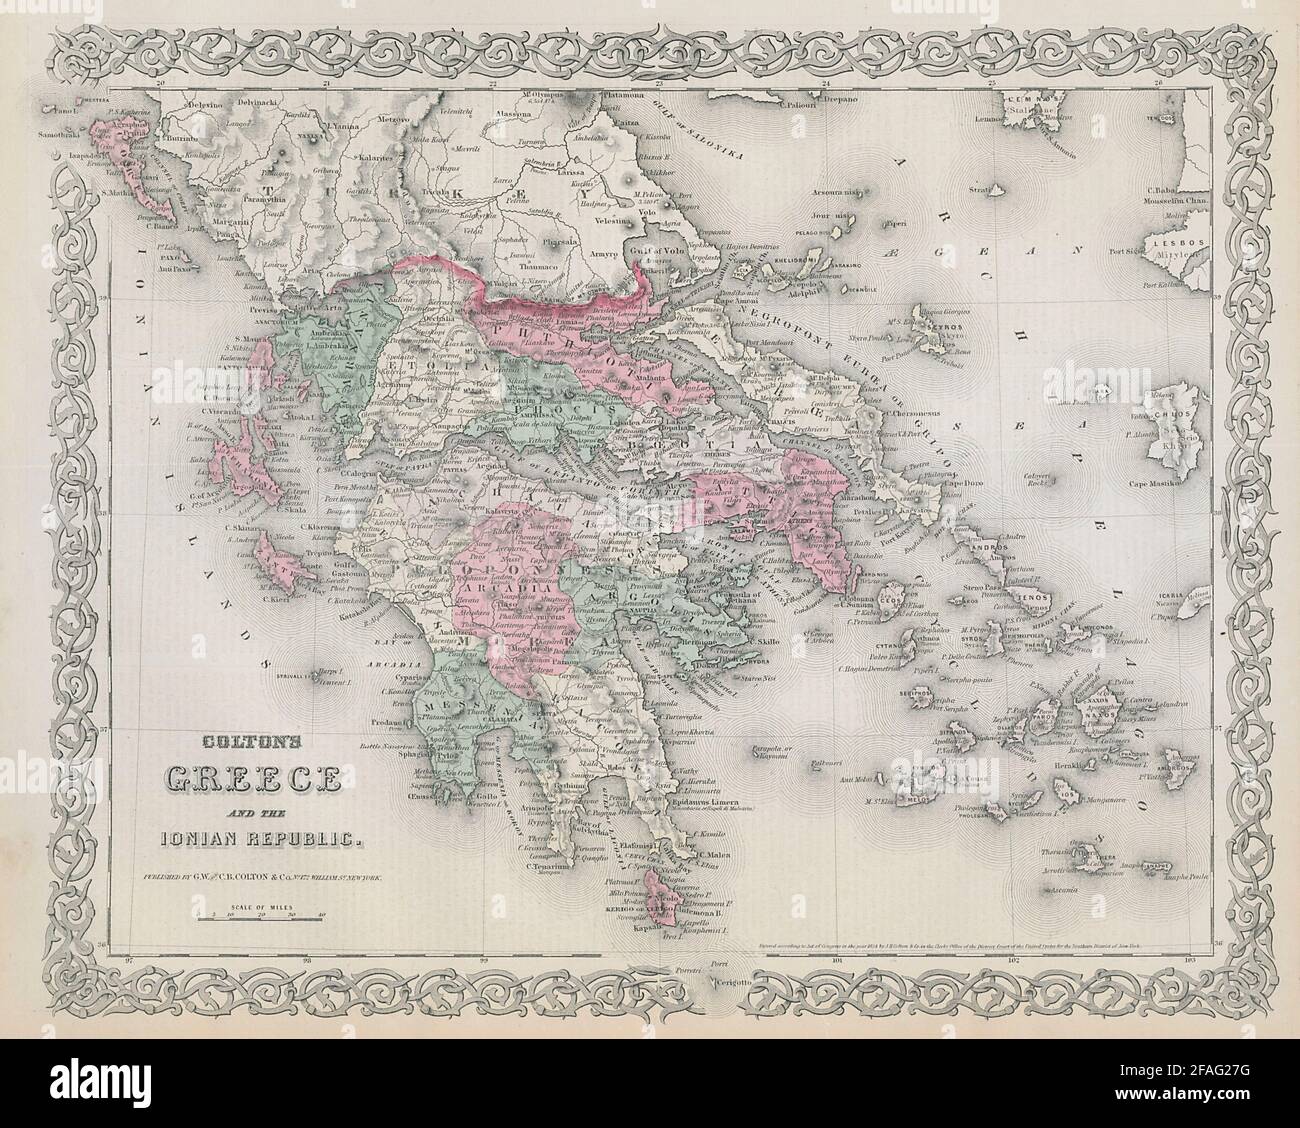 Colton's Greece and the Ionian Republic. Cyclades Aegean Sporades 1869 old map Stock Photo